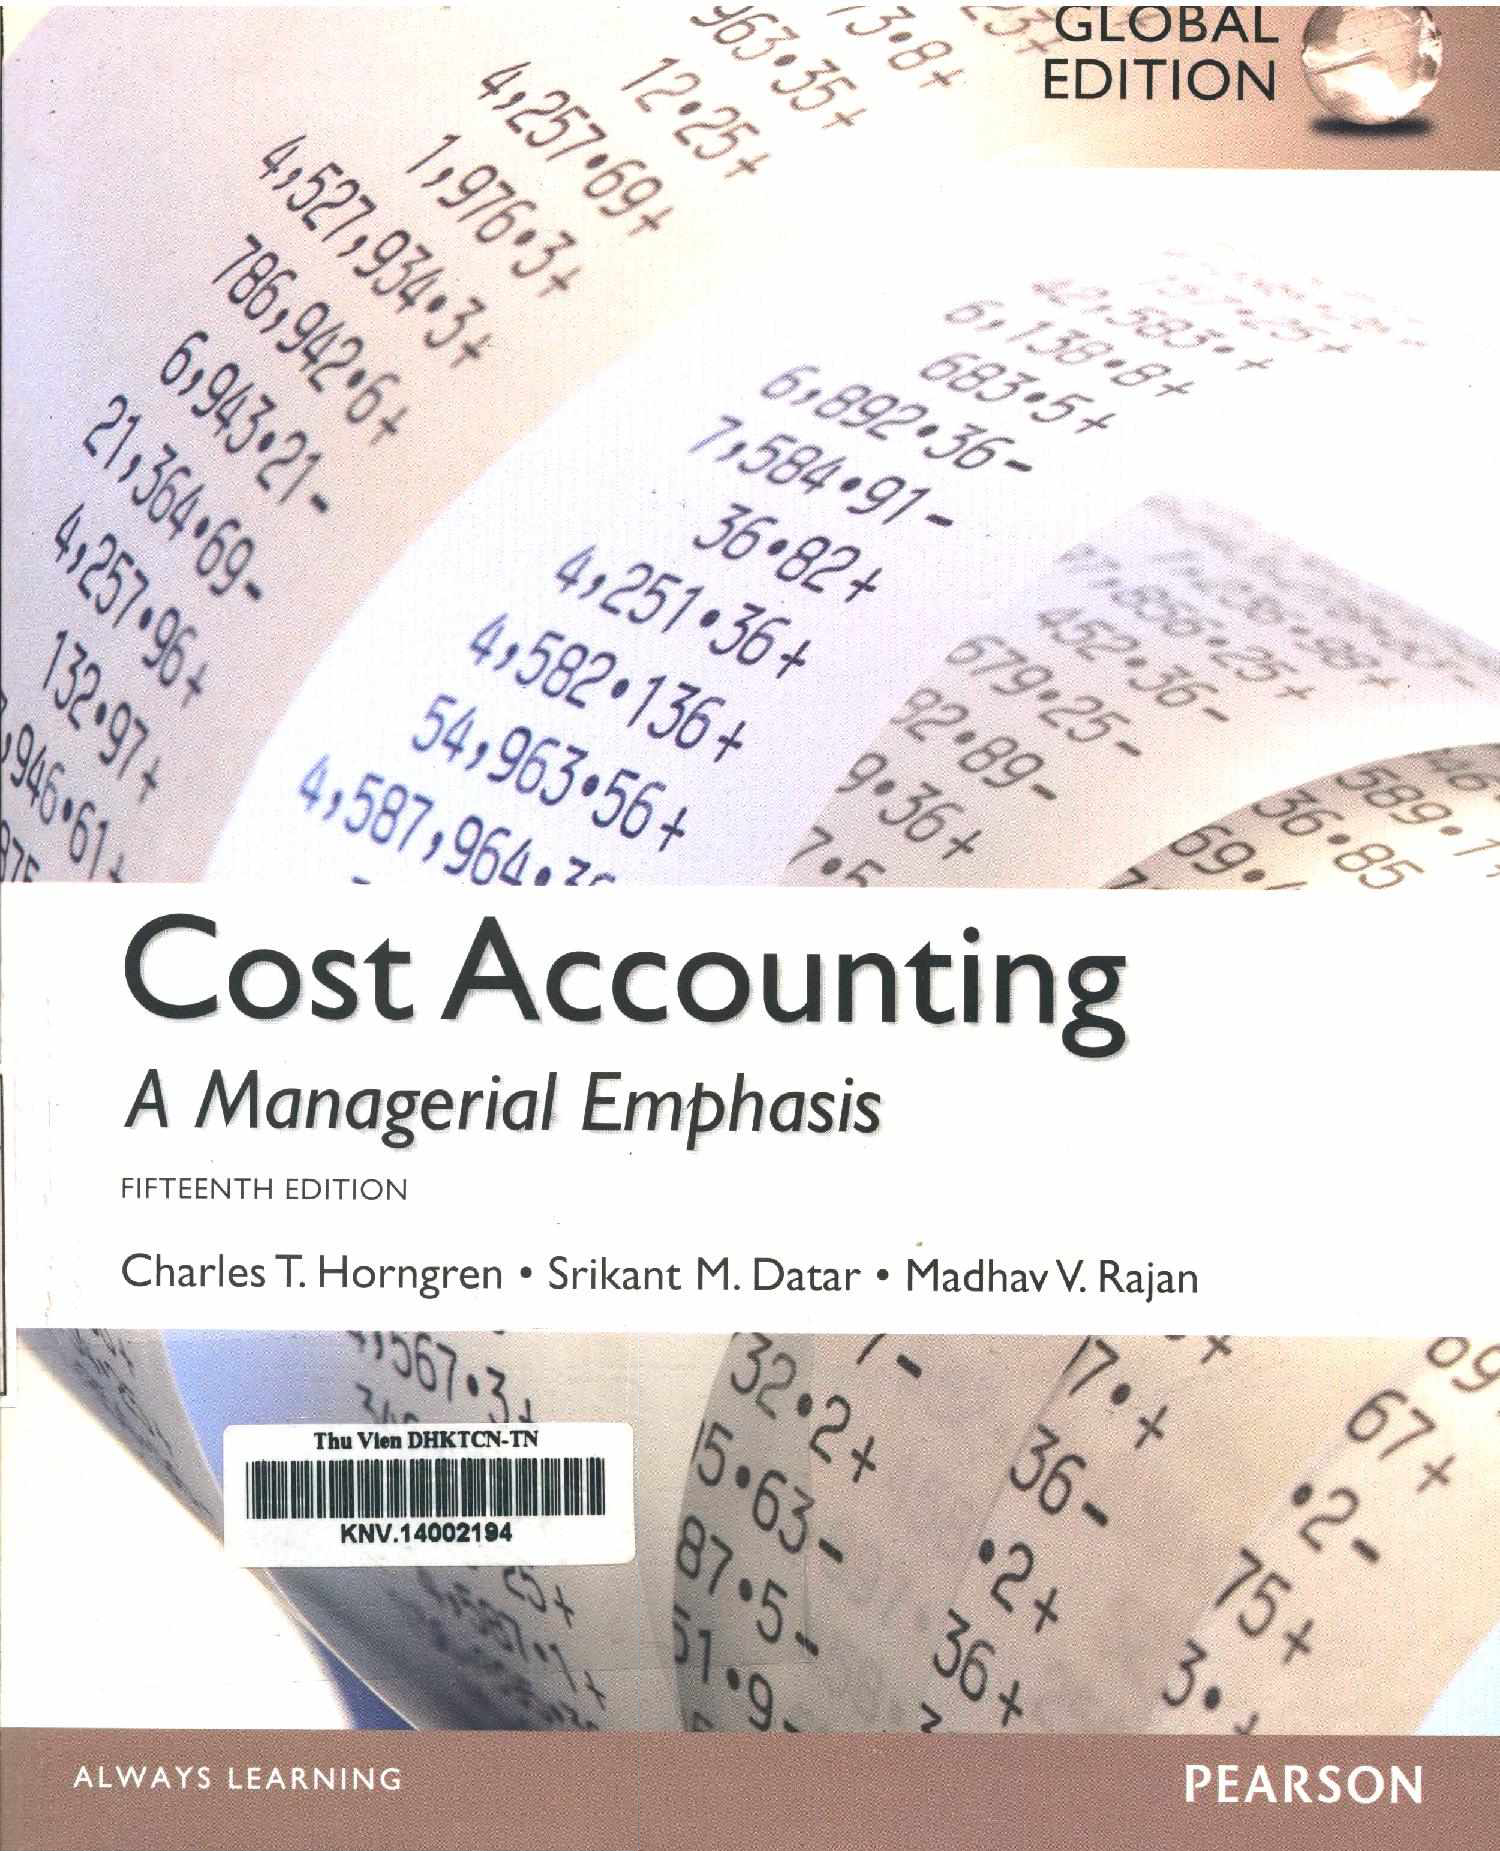 Cost accounting : A managerial emphasis